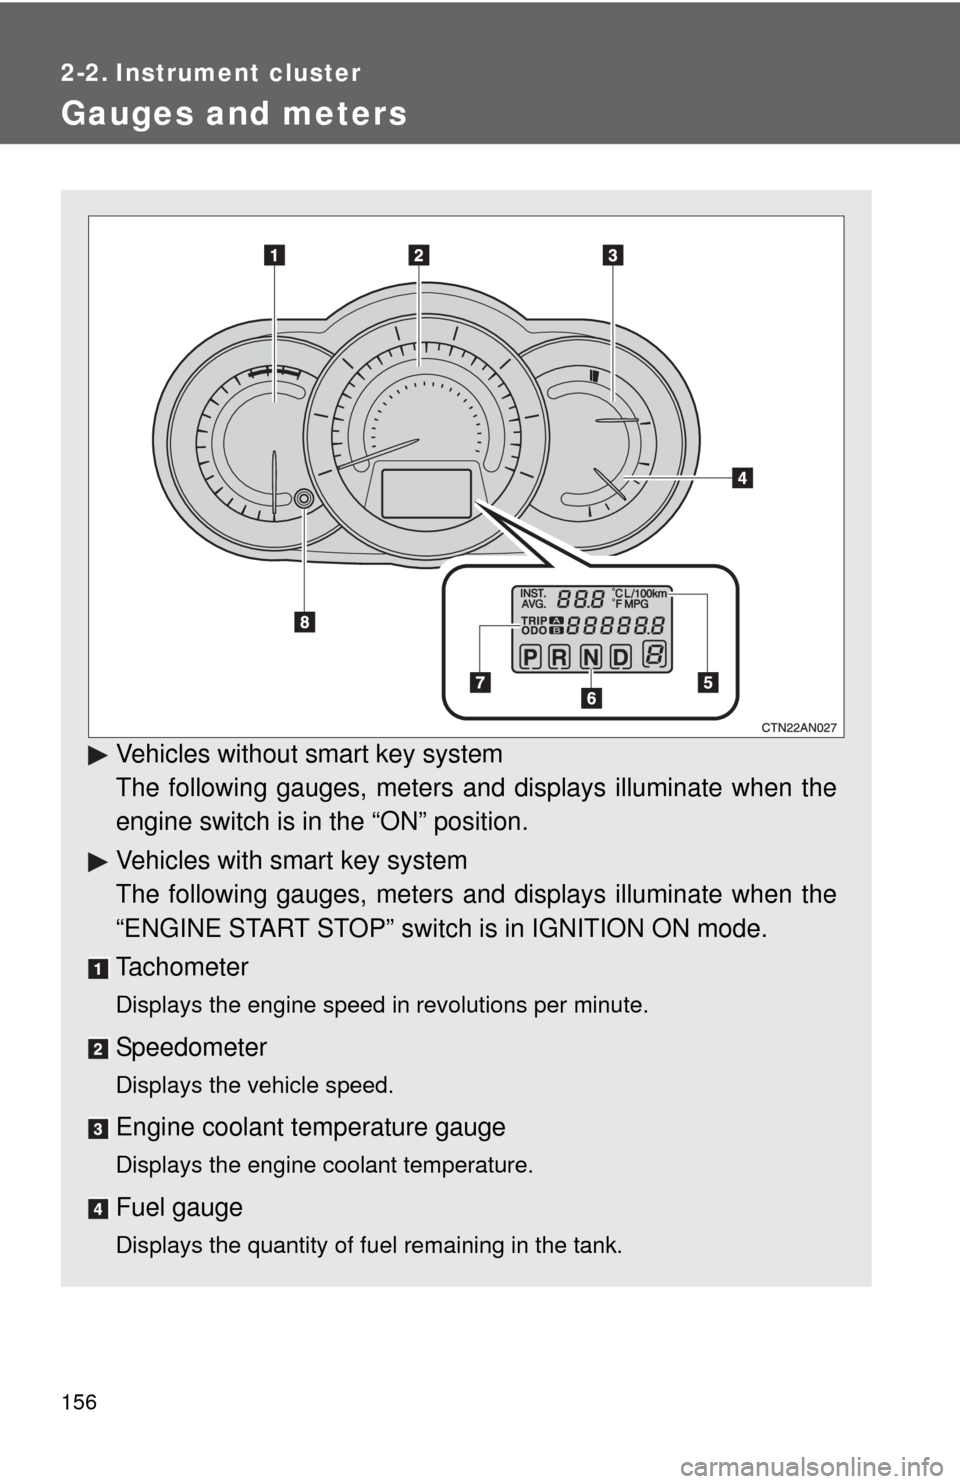 TOYOTA RAV4 2010 XA30 / 3.G Owners Manual 156
2-2. Instrument cluster
Gauges and meters
Vehicles without smart key system
The following gauges, meters and displays illuminate when the
engine switch is in the “ON” position.
Vehicles with s